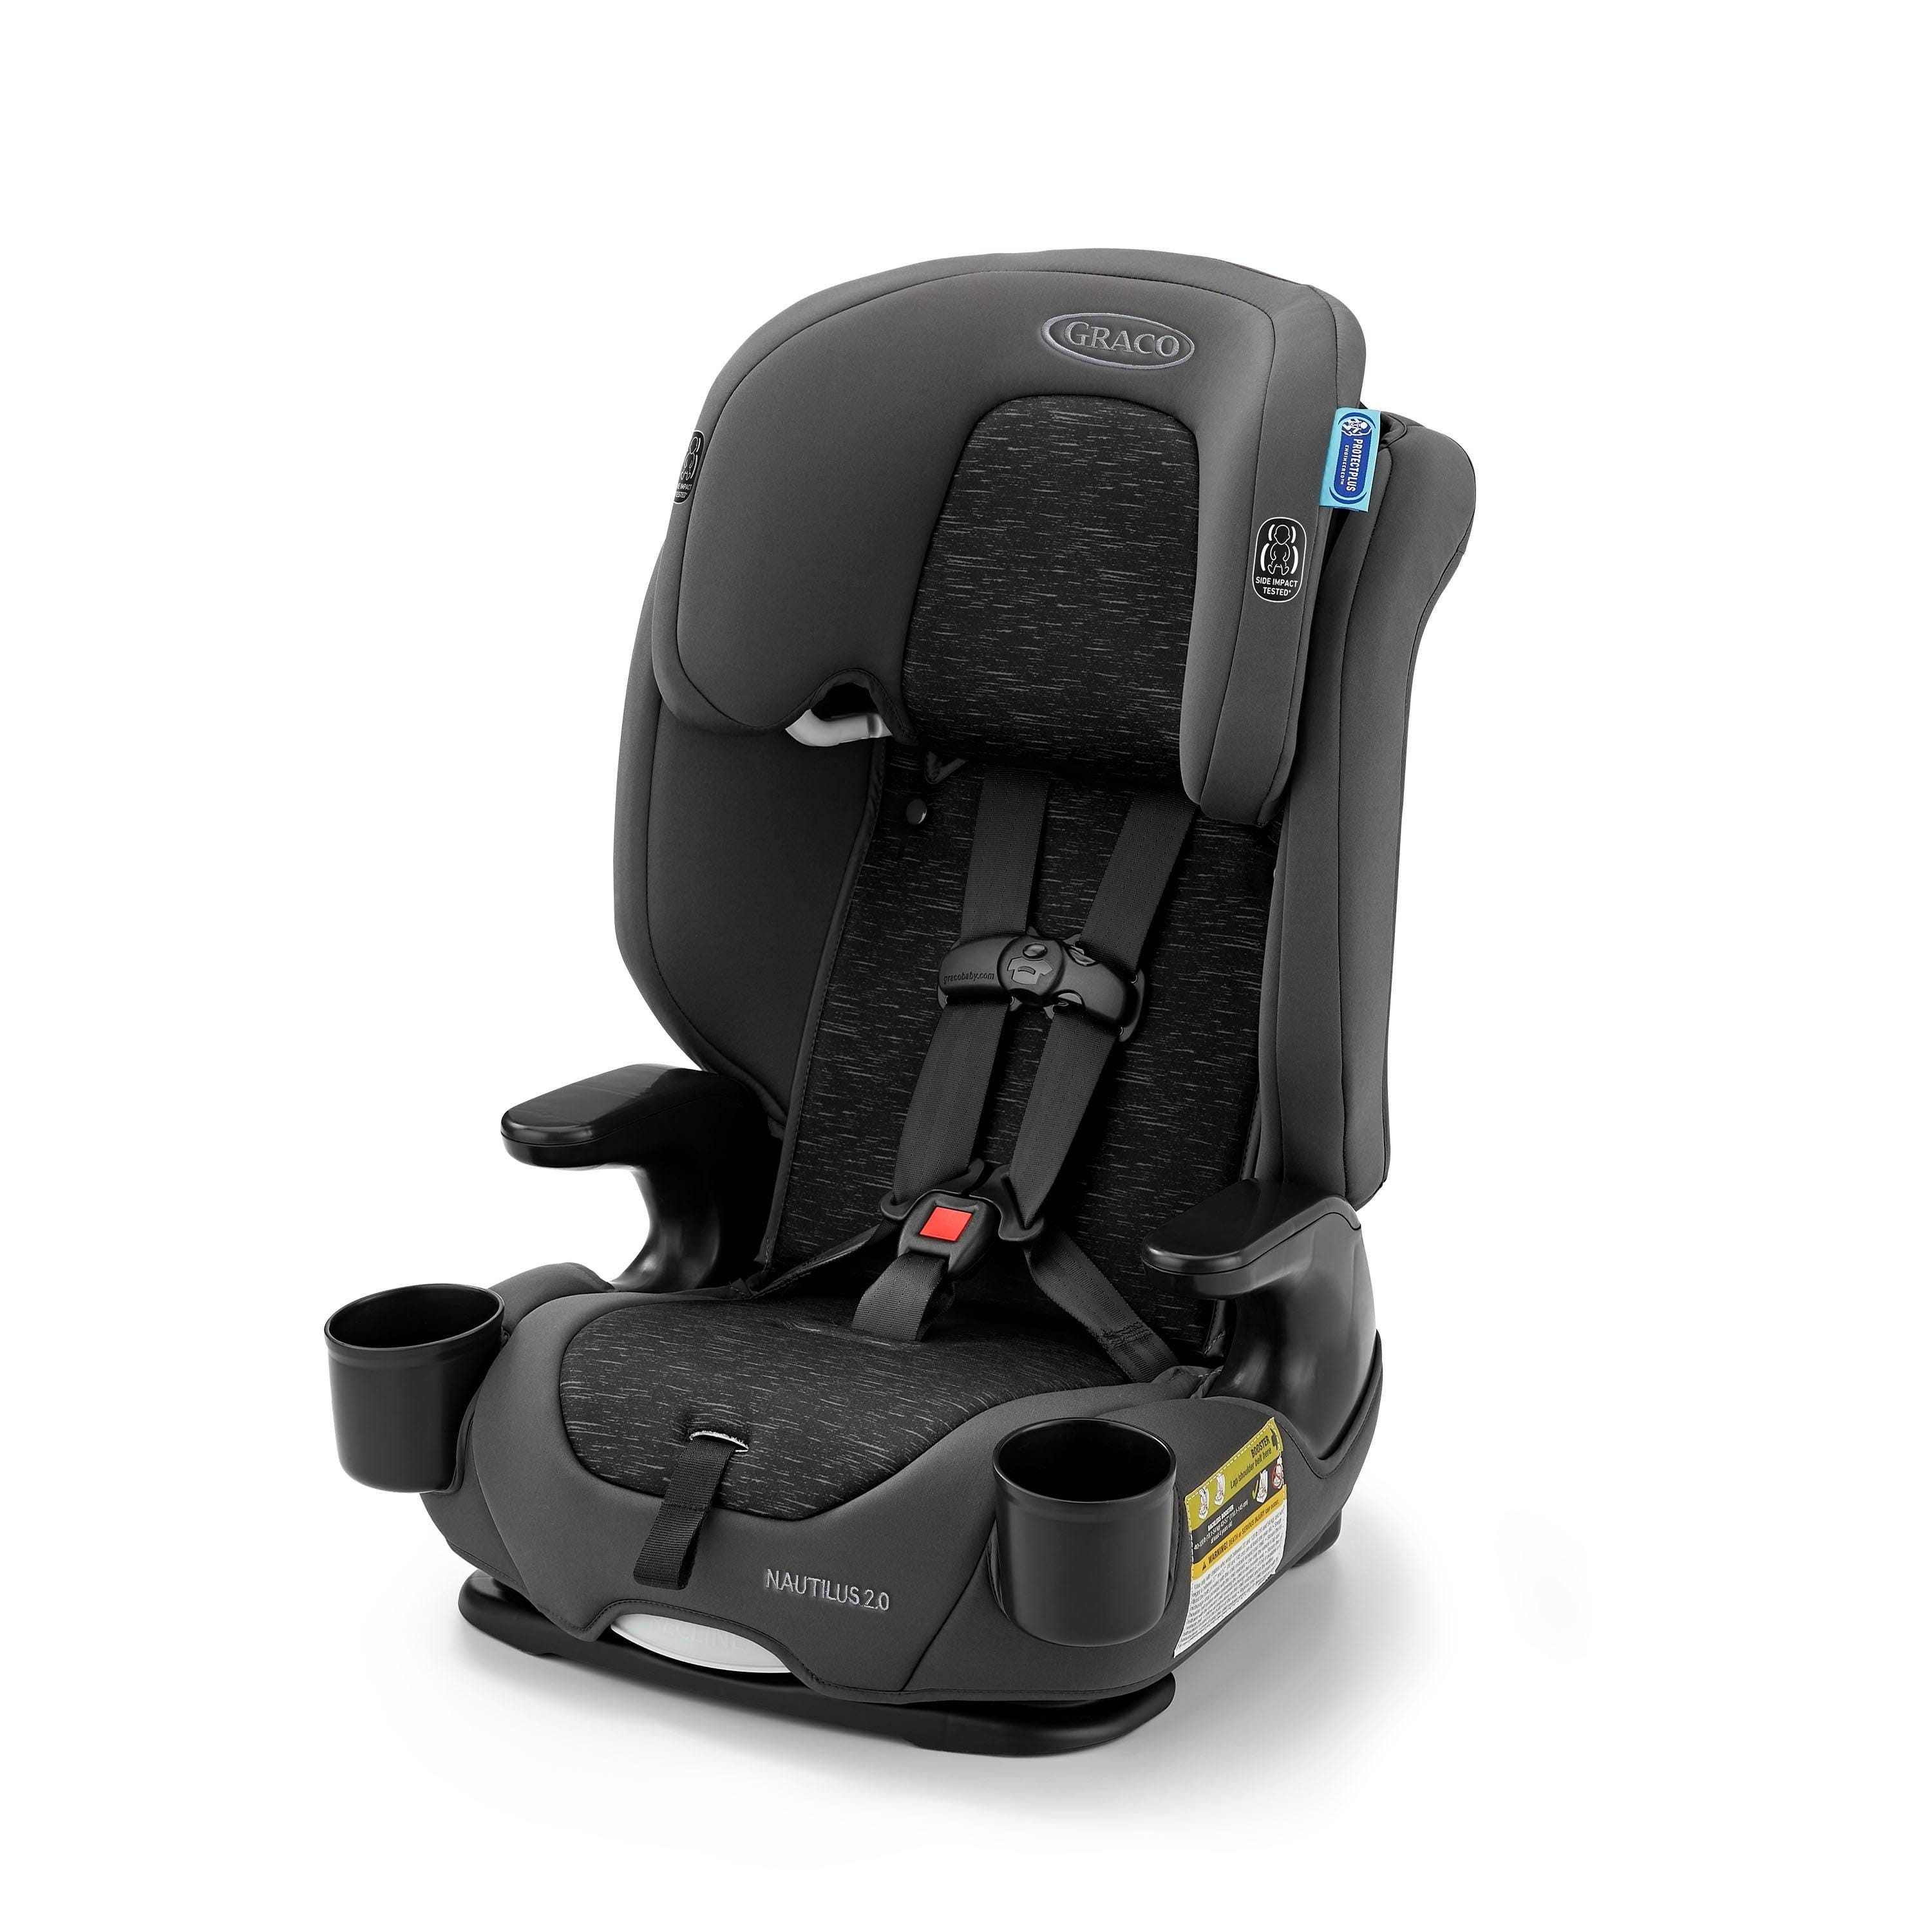 Graco Nautilus 2.0 Harness Booster Car Seat: 3-in-1 Safety Solution for Growing Children | Image